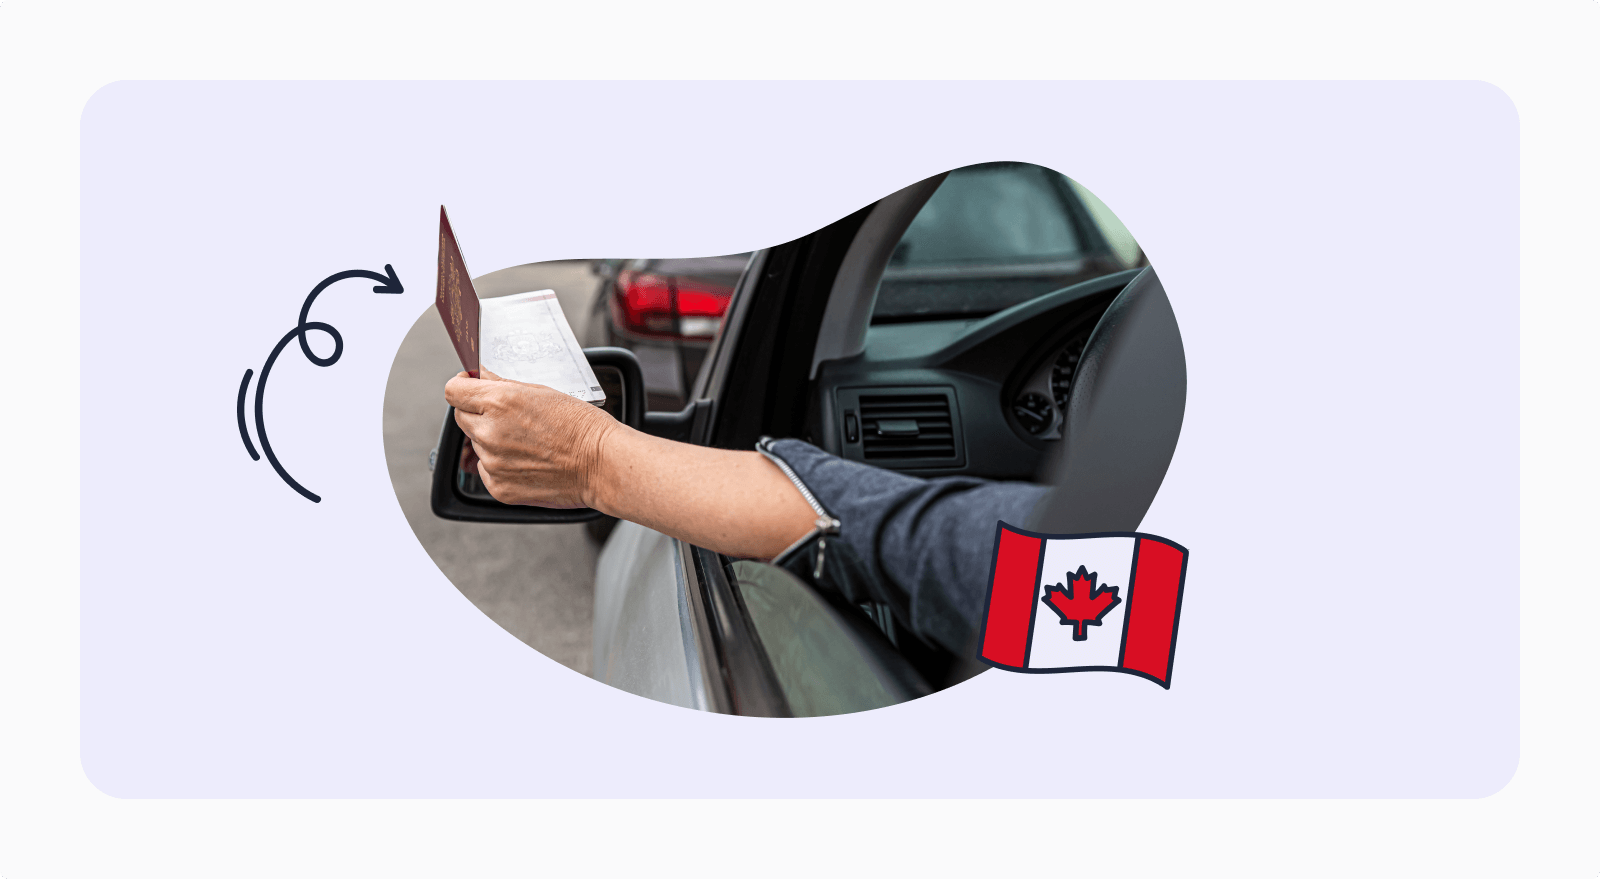 Entry requirements into Canada depend on several factors such as the travel method, duration of stay, and past criminal record